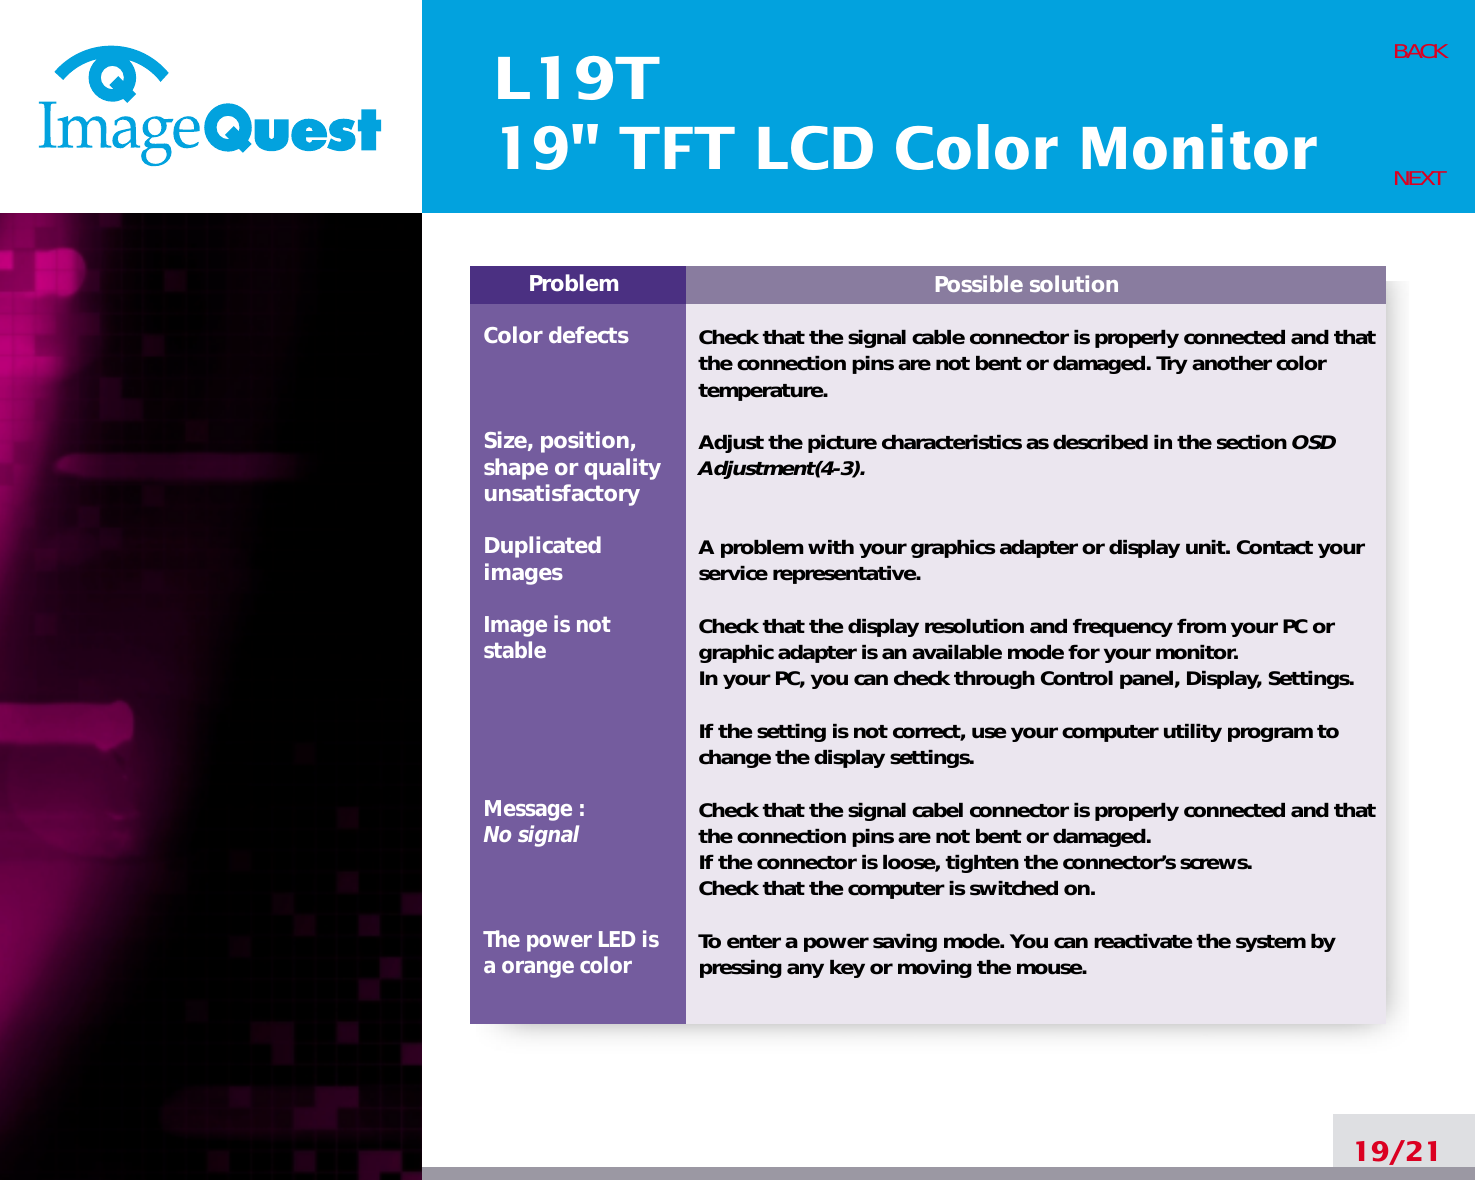 L19T19&quot; TFT LCD Color Monitor19/21BACKNEXTPossible solutionCheck that the signal cable connector is properly connected and thatthe connection pins are not bent or damaged. Try another colortemperature. Adjust the picture characteristics as described in the section OSDAdjustment(4-3).A problem with your graphics adapter or display unit. Contact yourservice representative.Check that the display resolution and frequency from your PC orgraphic adapter is an available mode for your monitor.In your PC, you can check through Control panel, Display, Settings.If the setting is not correct, use your computer utility program tochange the display settings.Check that the signal cabel connector is properly connected and thatthe connection pins are not bent or damaged.If the connector is loose, tighten the connector’s screws.Check that the computer is switched on.To enter a power saving mode. You can reactivate the system bypressing any key or moving the mouse.ProblemColor defectsSize, position,shape or qualityunsatisfactoryDuplicatedimagesImage is notstableMessage : No signalThe power LED isa orange color